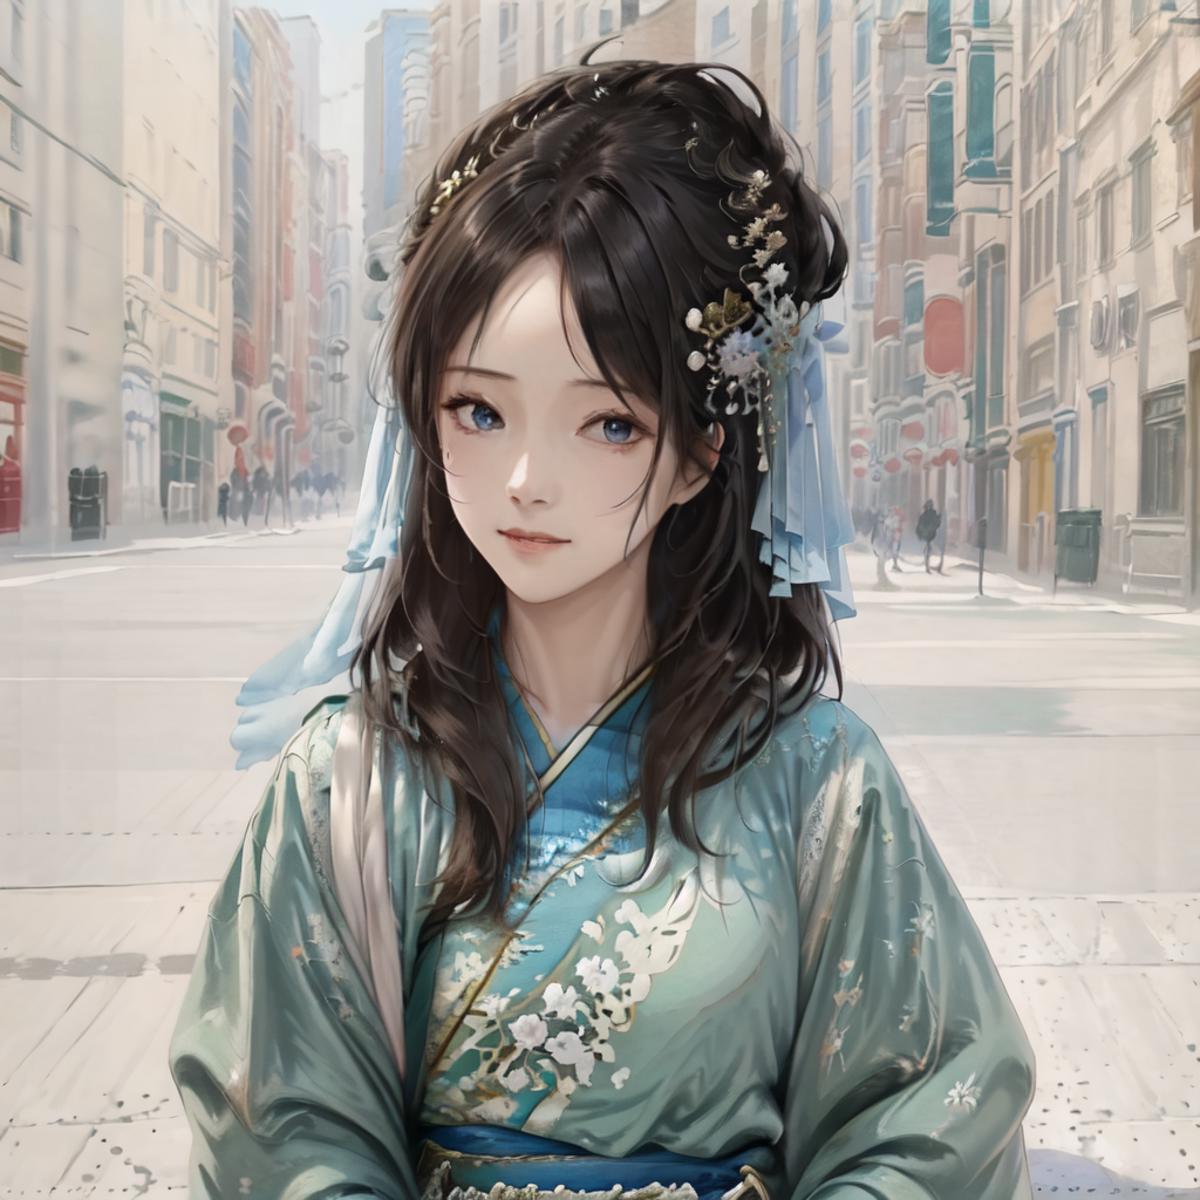 Douyin WeChat IG single person avatar generated LORA image by 26400504933